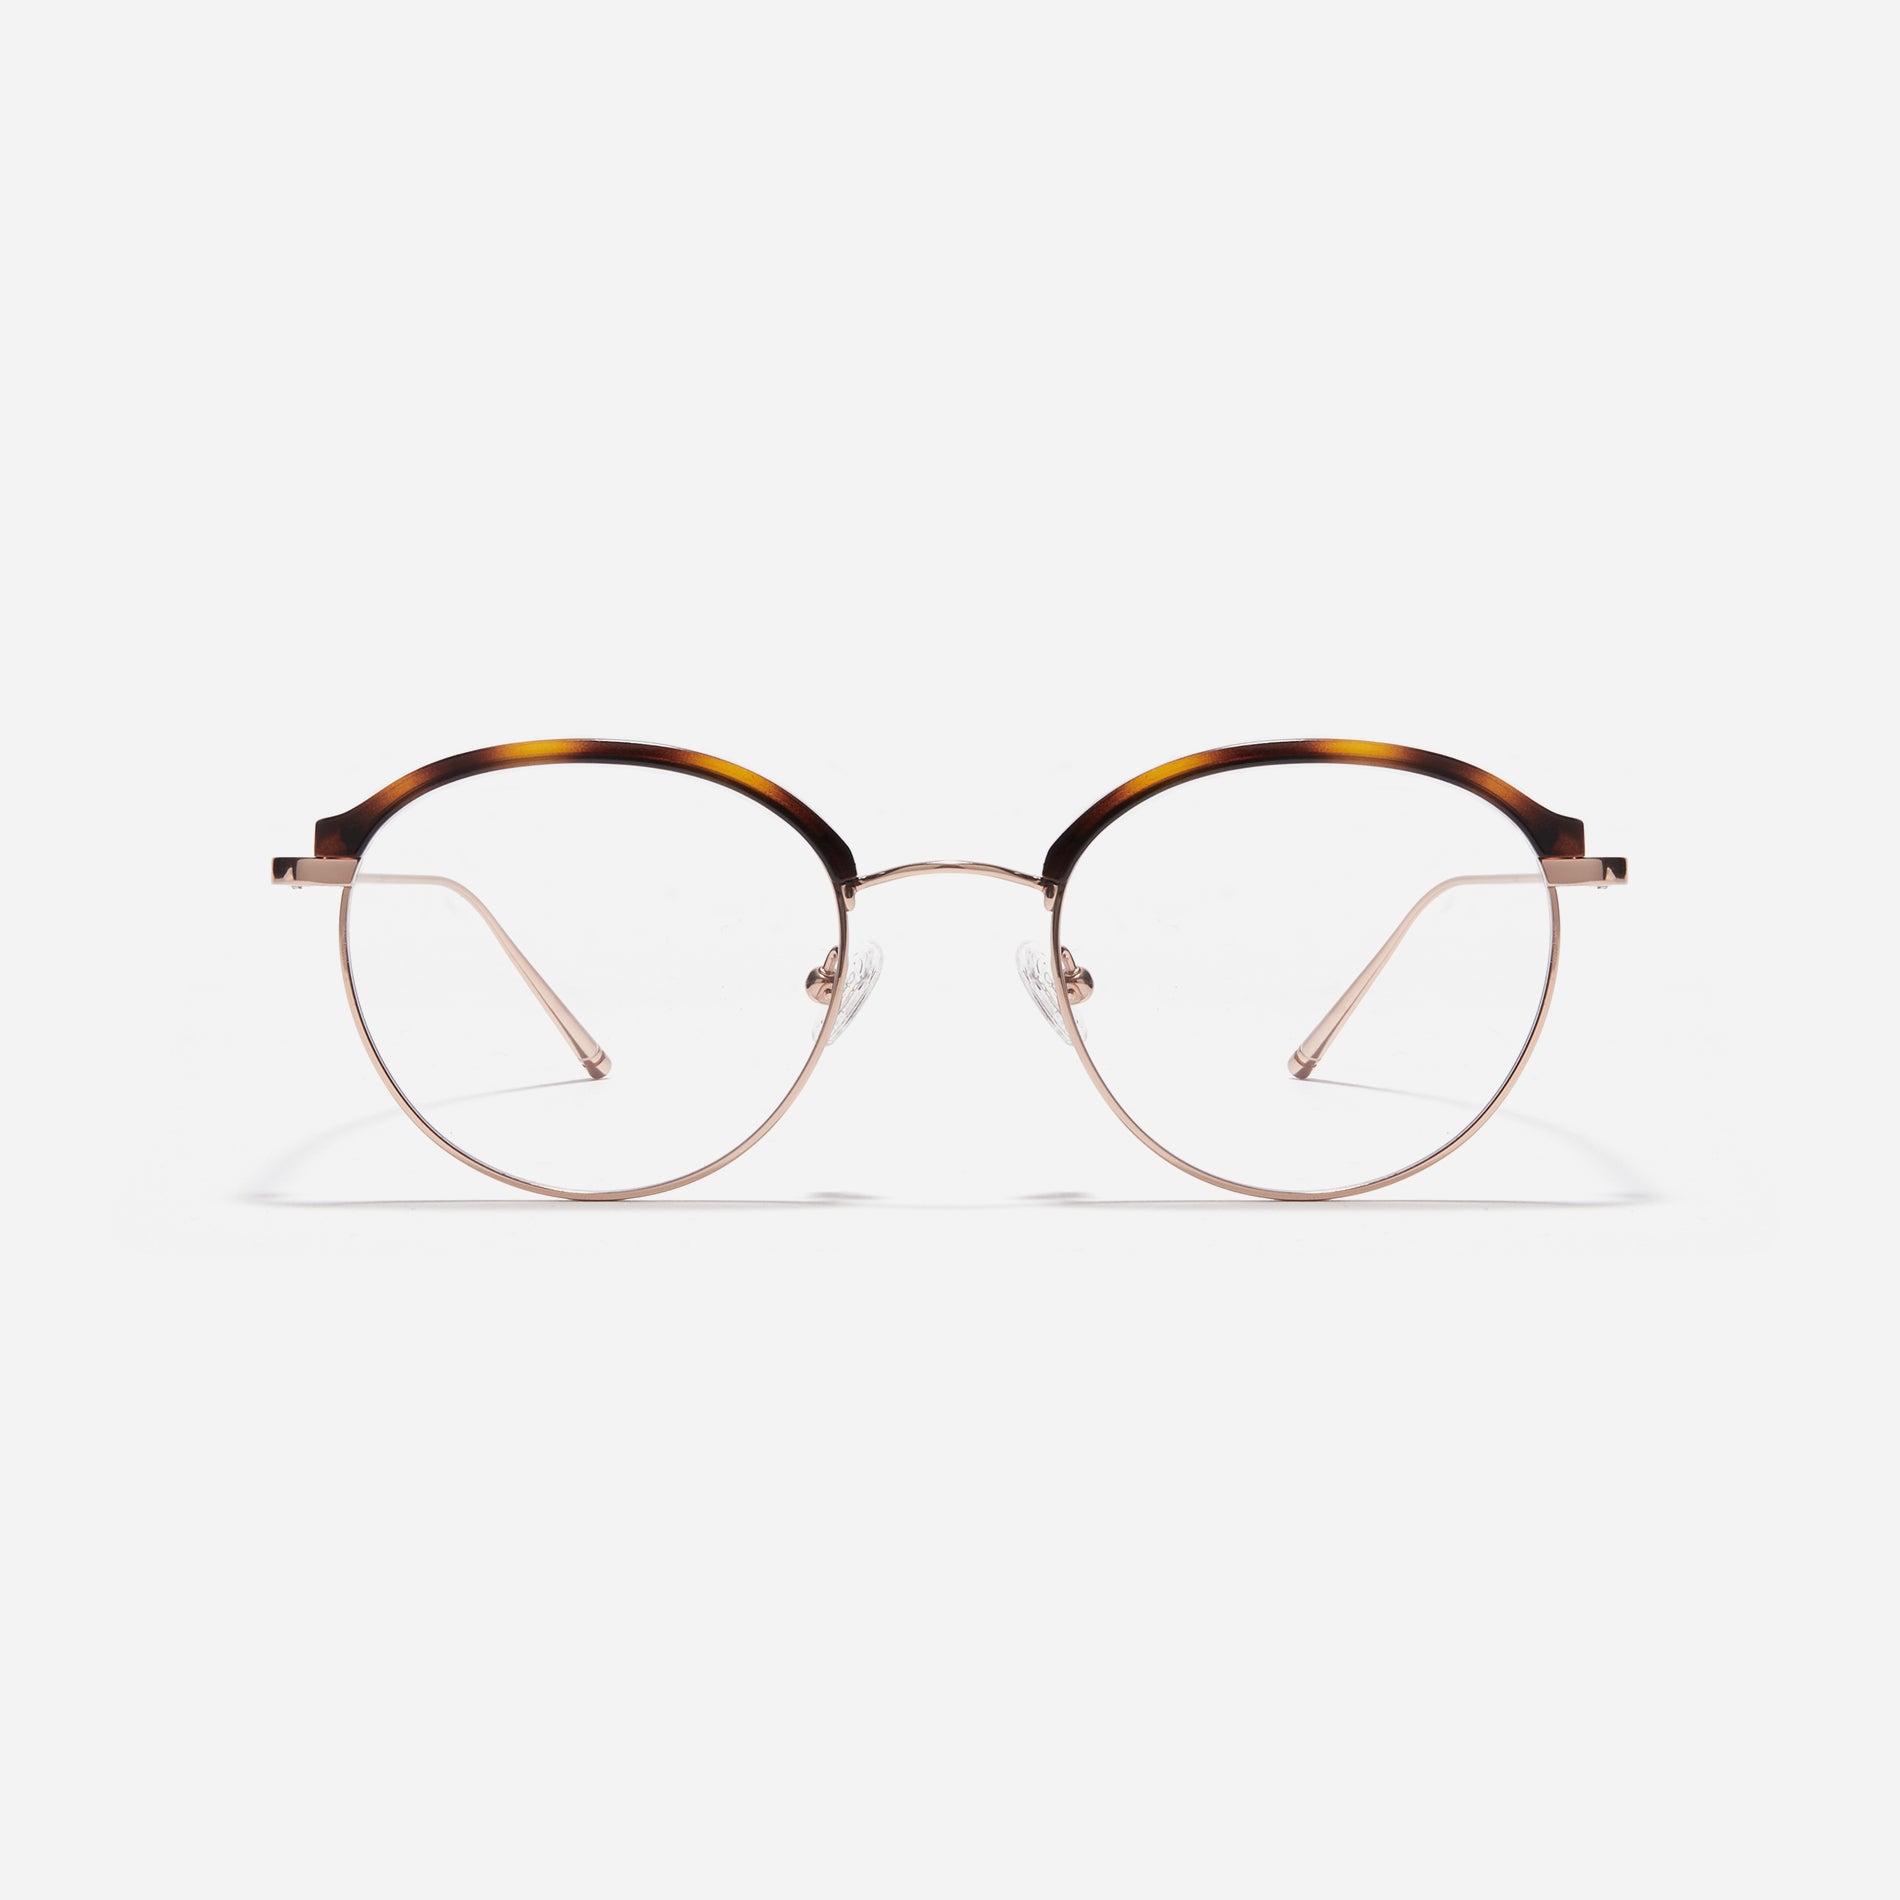 Round-shaped combination eyeglasses with a semi-rimless design. Plia R design incorporates dual lining on the tips to prevent slipping and ensure a consistently comfortable wearing experience.